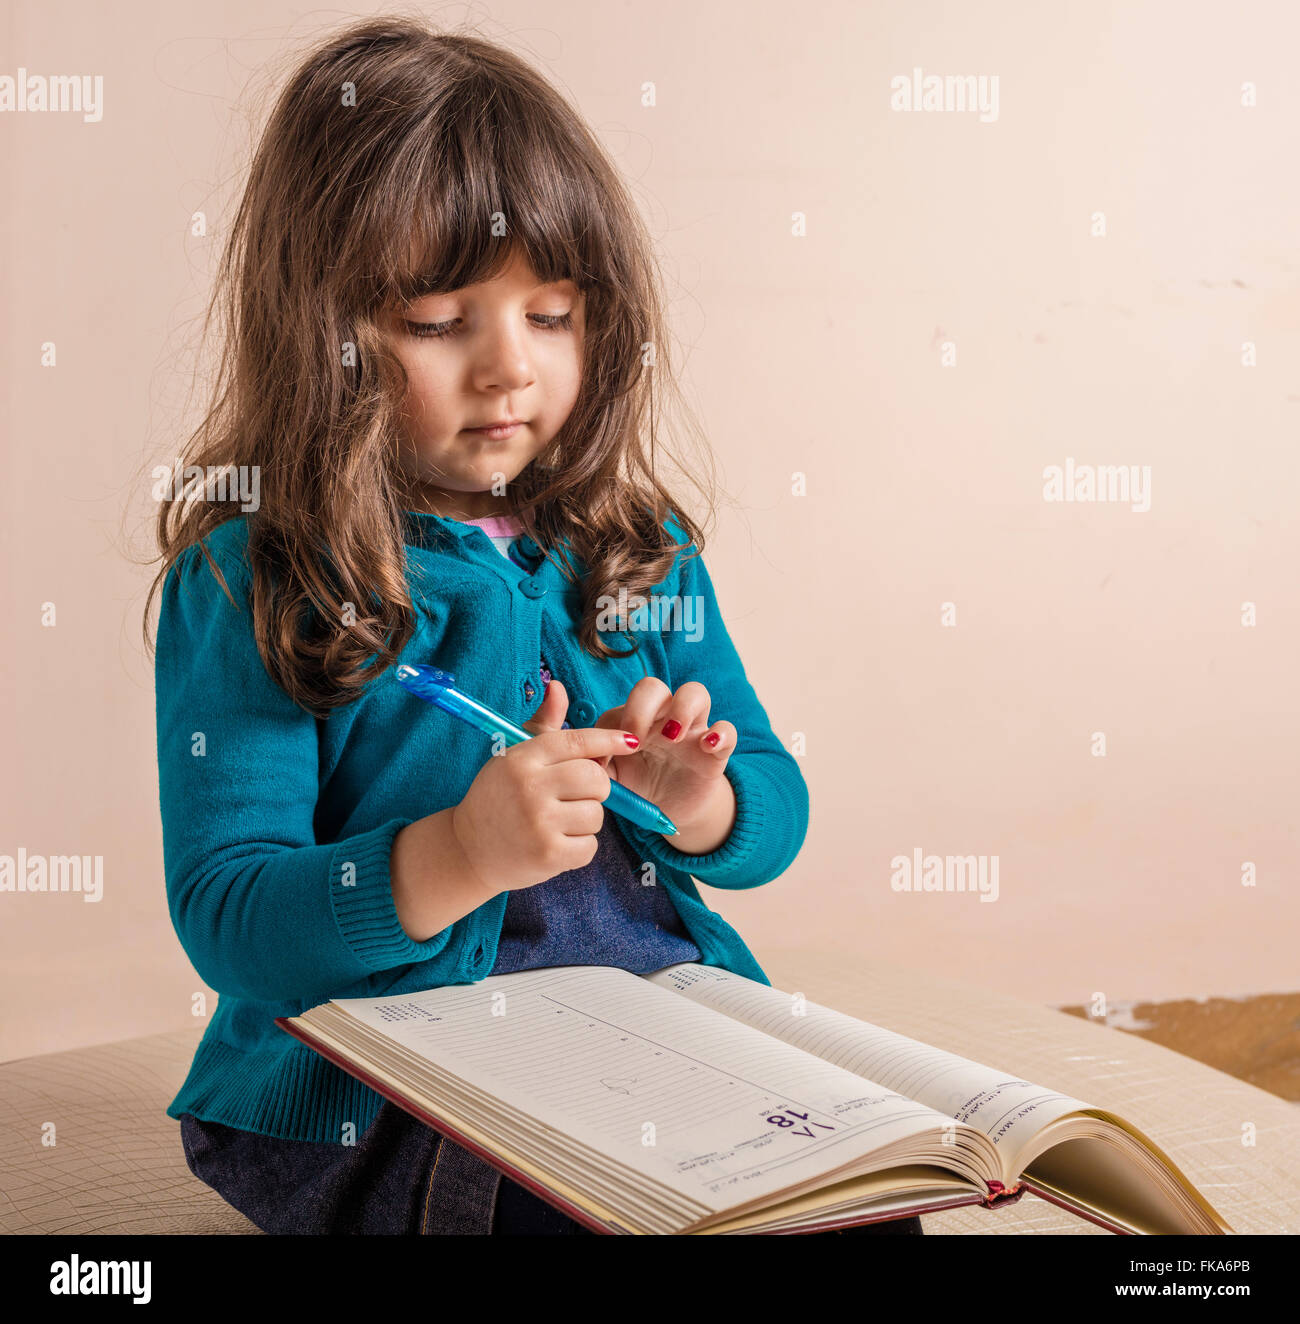 Samll girl inside studio with red copybook in hand Stock Photo